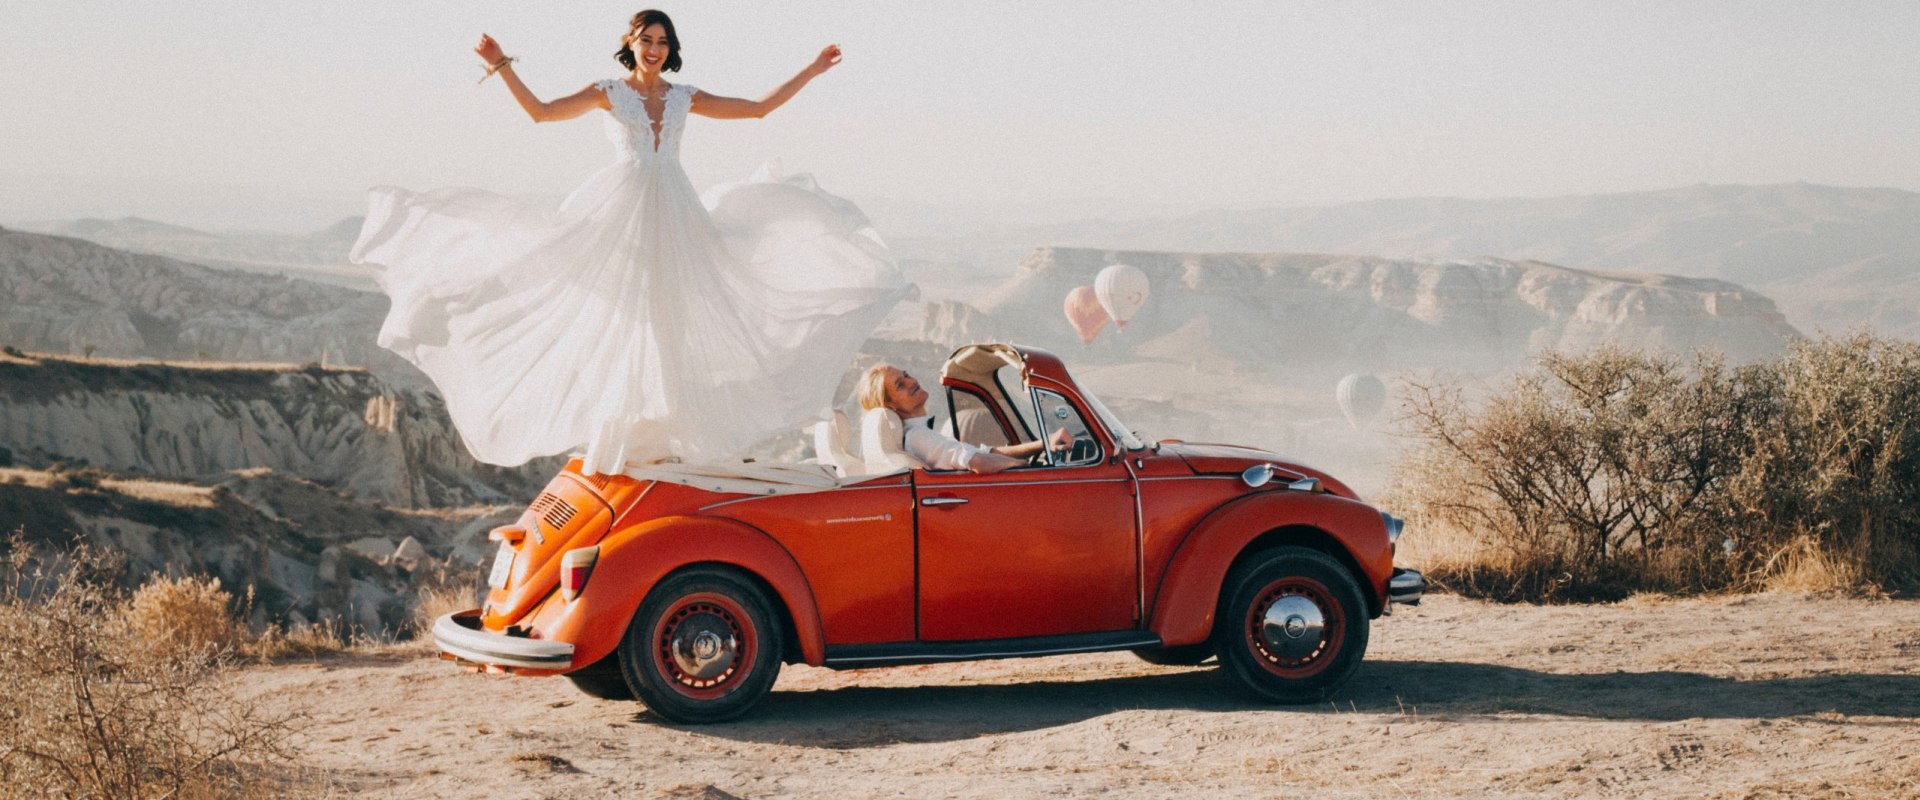 Comparing Vehicle Types, Capacities, and Amenities for Your Wedding Day